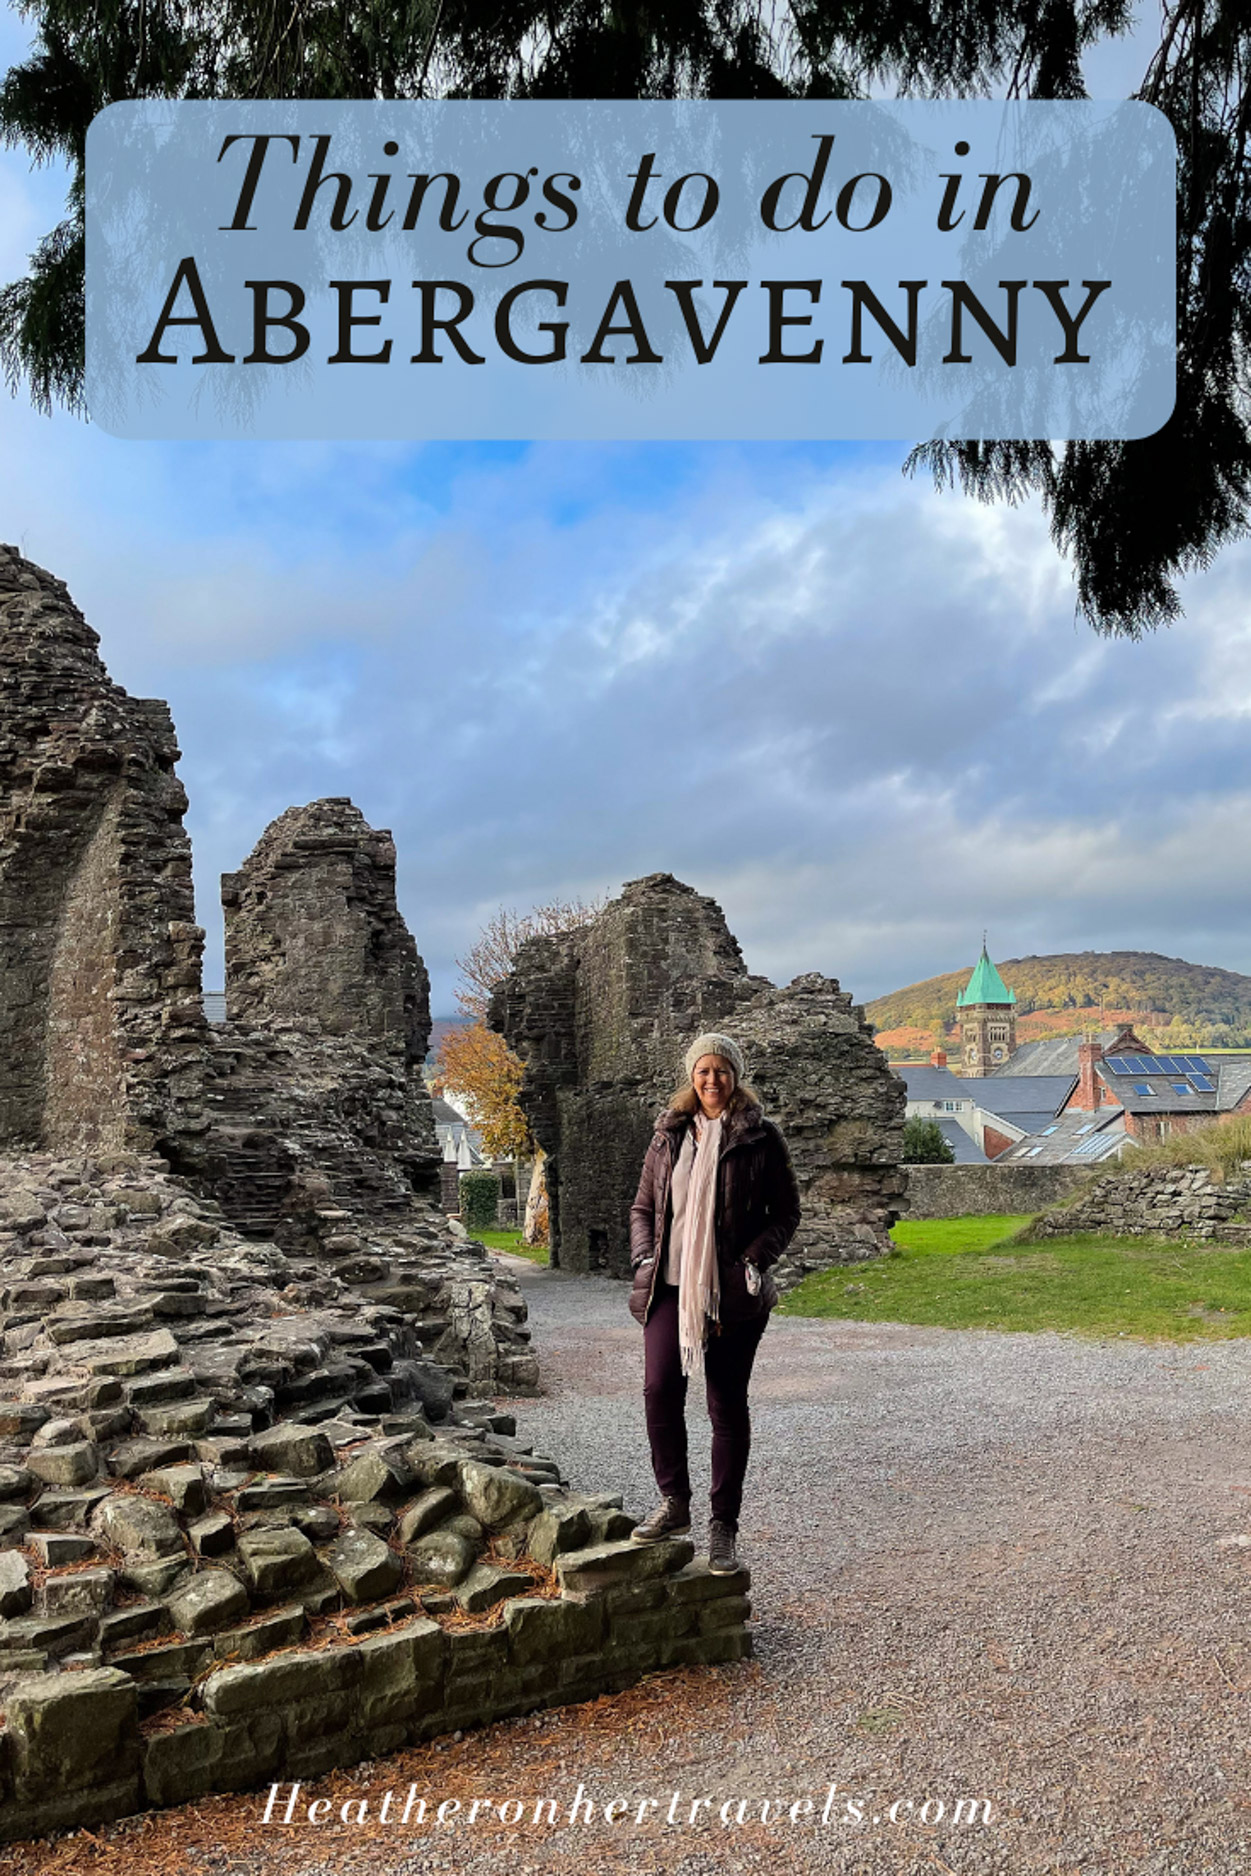 Things to do in Abergavenny Wales